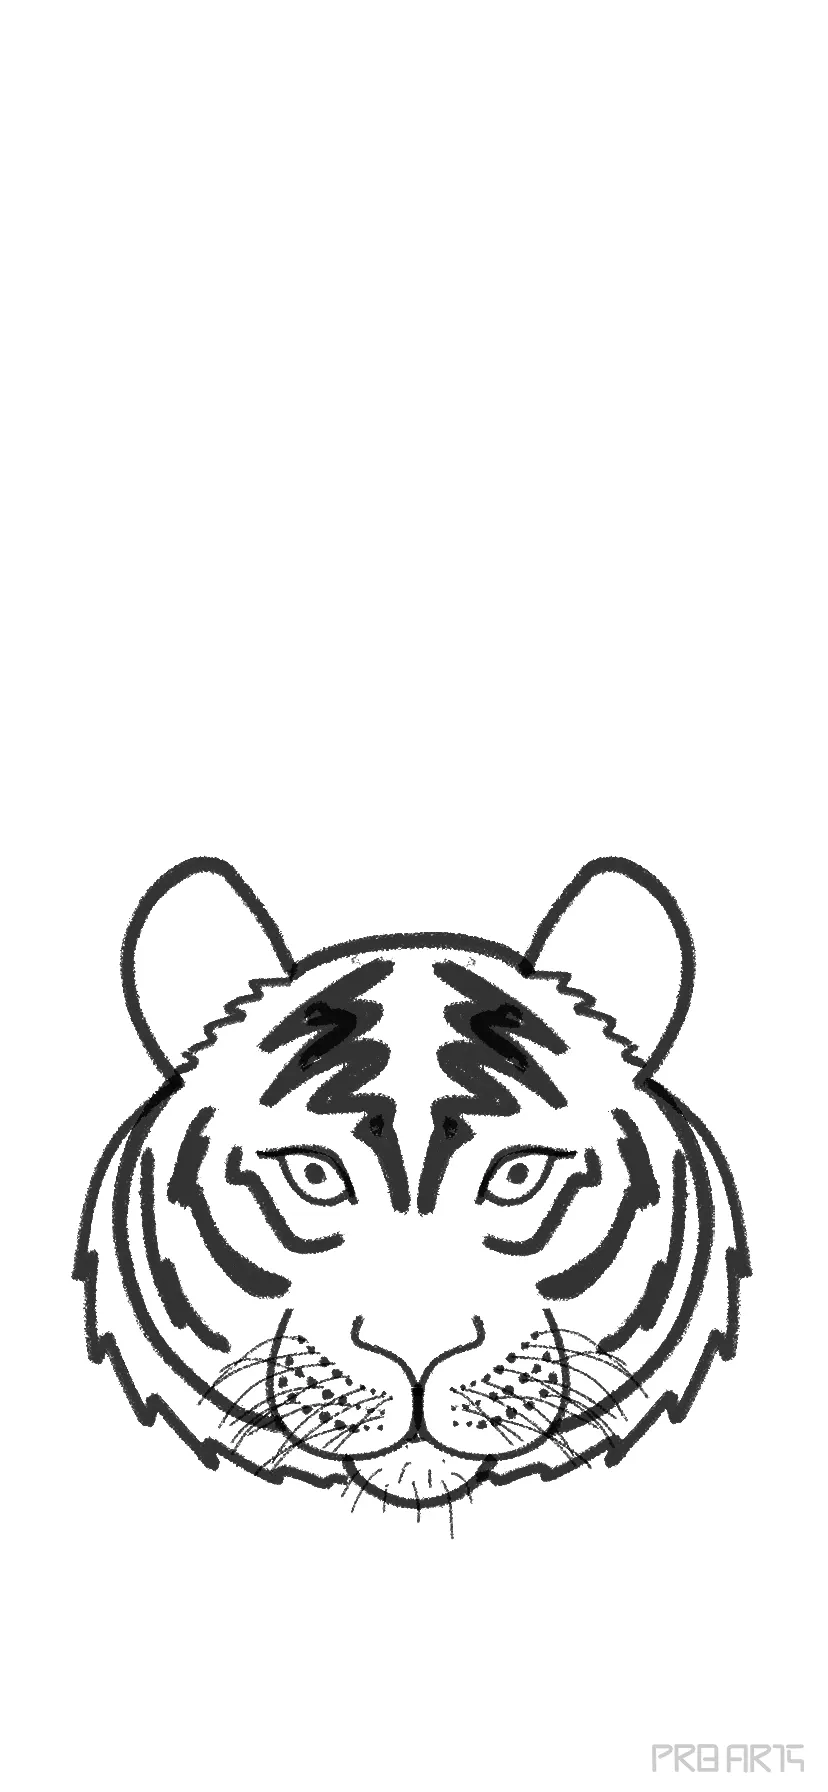 how to draw a tiger face step by step